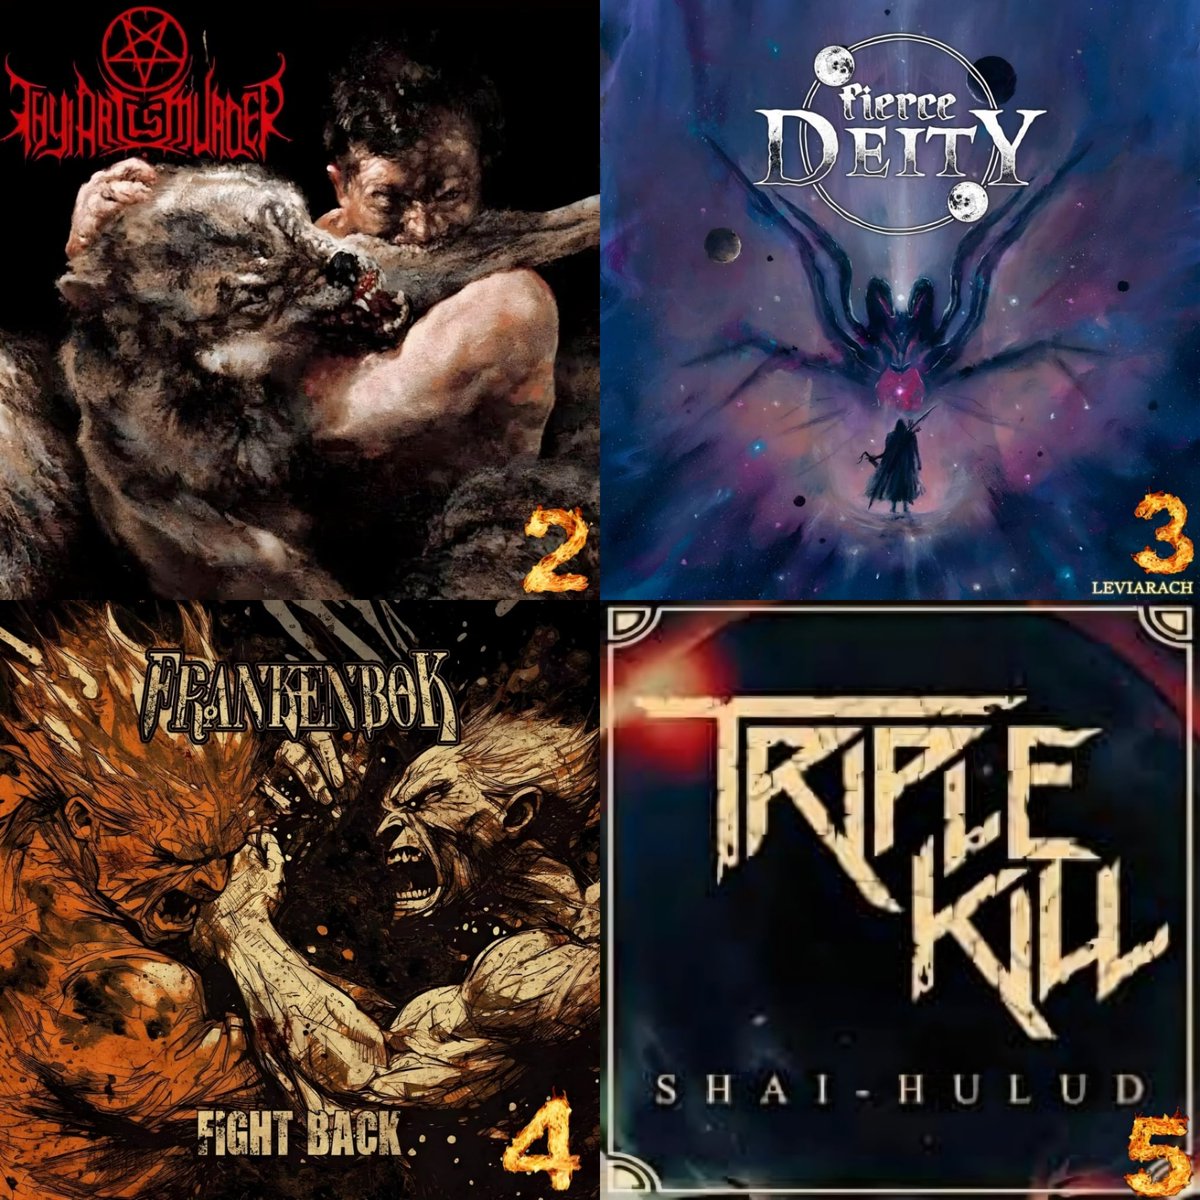 BCC TOP 20 AUSTRALIAN METAL SINGLES FOR 2023 5: @triplekillband - SHAI-HULUD 4: @Frankenbok - FIGHT BACK 3: @FierceDeityBand - LEVIARCH 2: @thyartismurder - UNTIL THERE IS NO LONGER #beautifulcarcrash #top20 #australian #metal #singles #2023 #supportindependentmusic